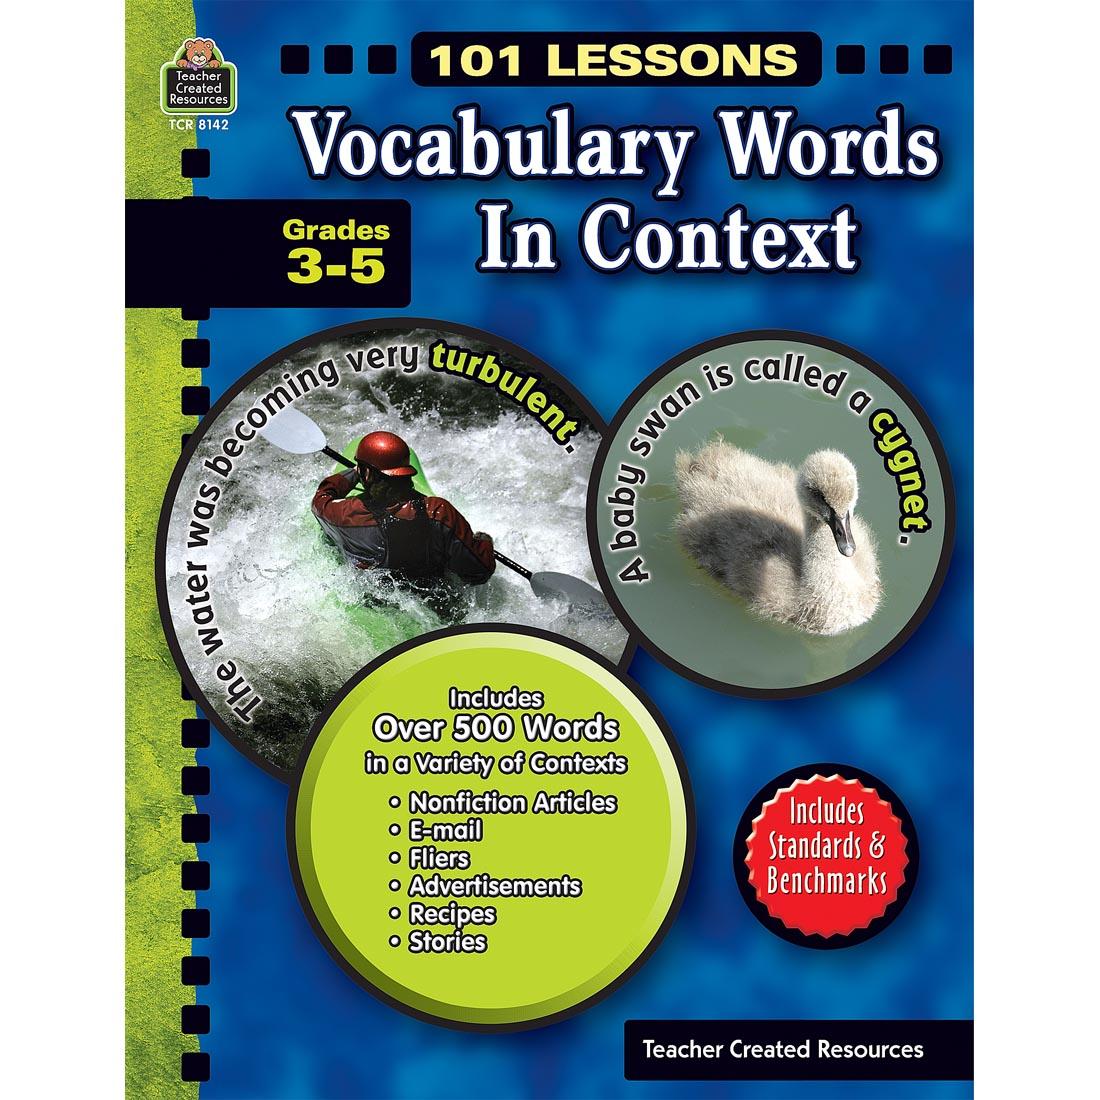 101 Lessons Vocabulary Words in Context Grades 3-5